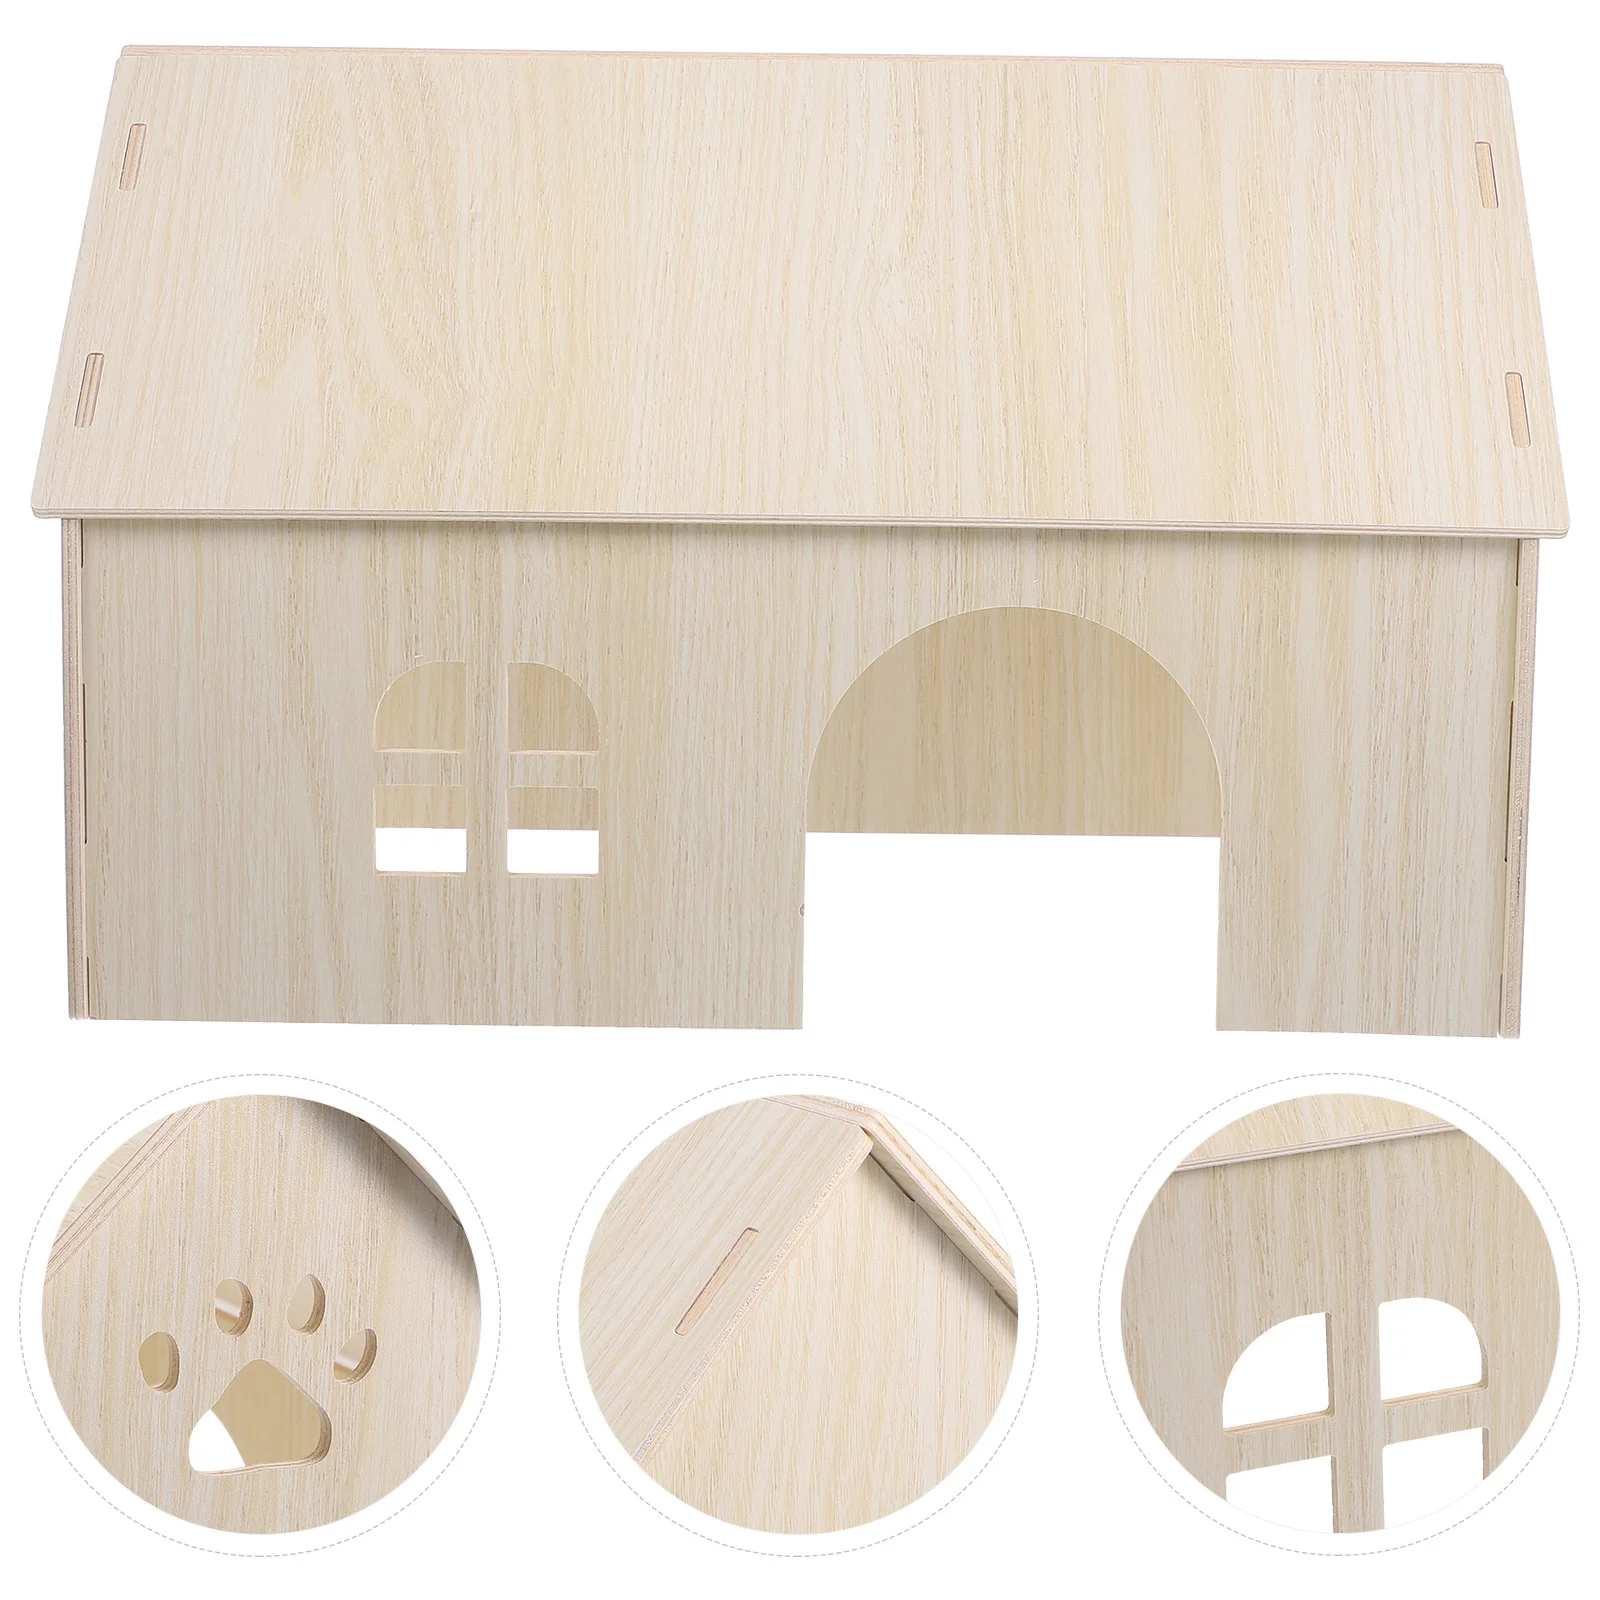 

Guinea Pig Maze Home Rat Hideout Squirrel Wooden House Toy Accessories Pets Exercising Hamster Playset